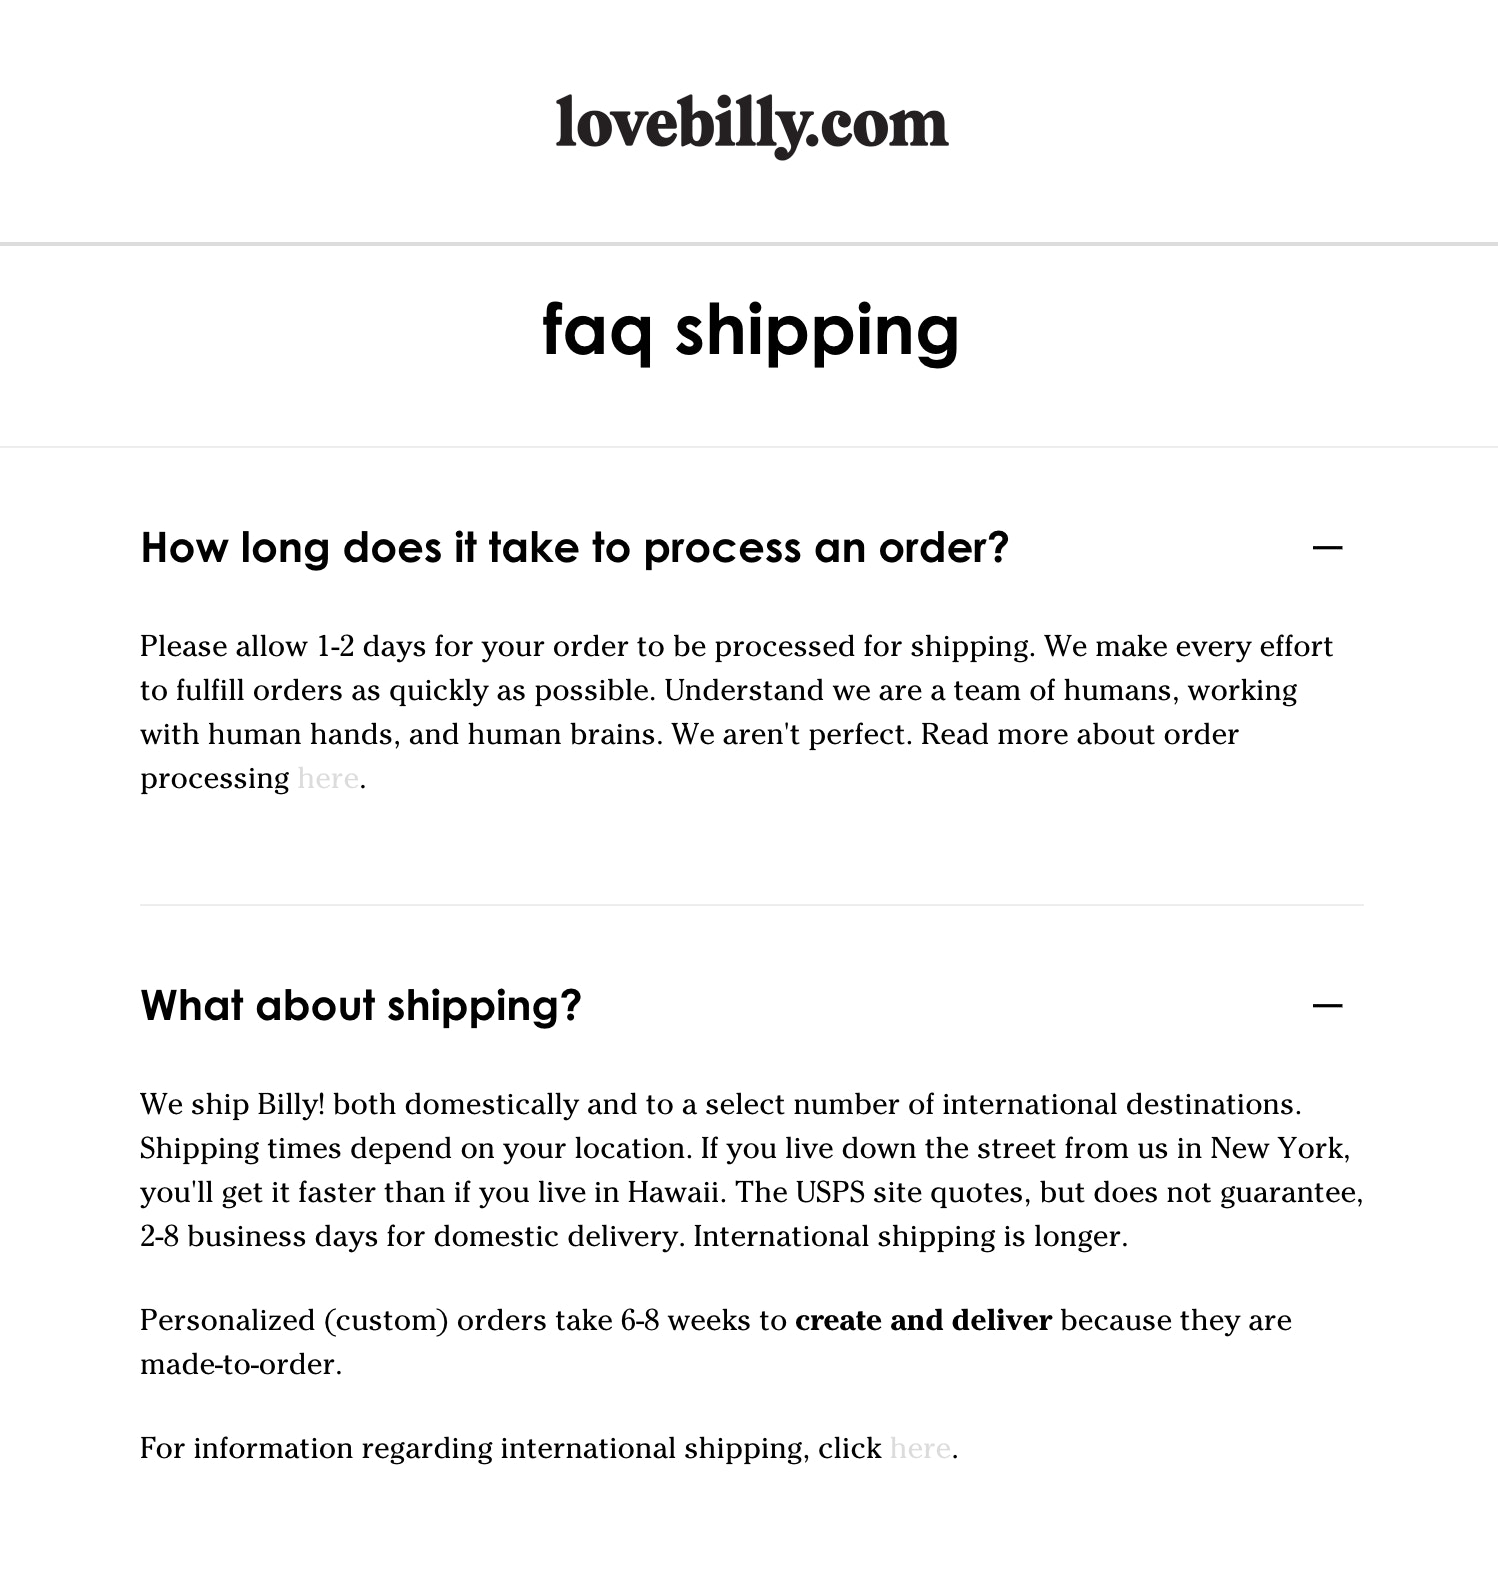 5 Ways to Offer Free Shipping Without Losing Money - Replyco